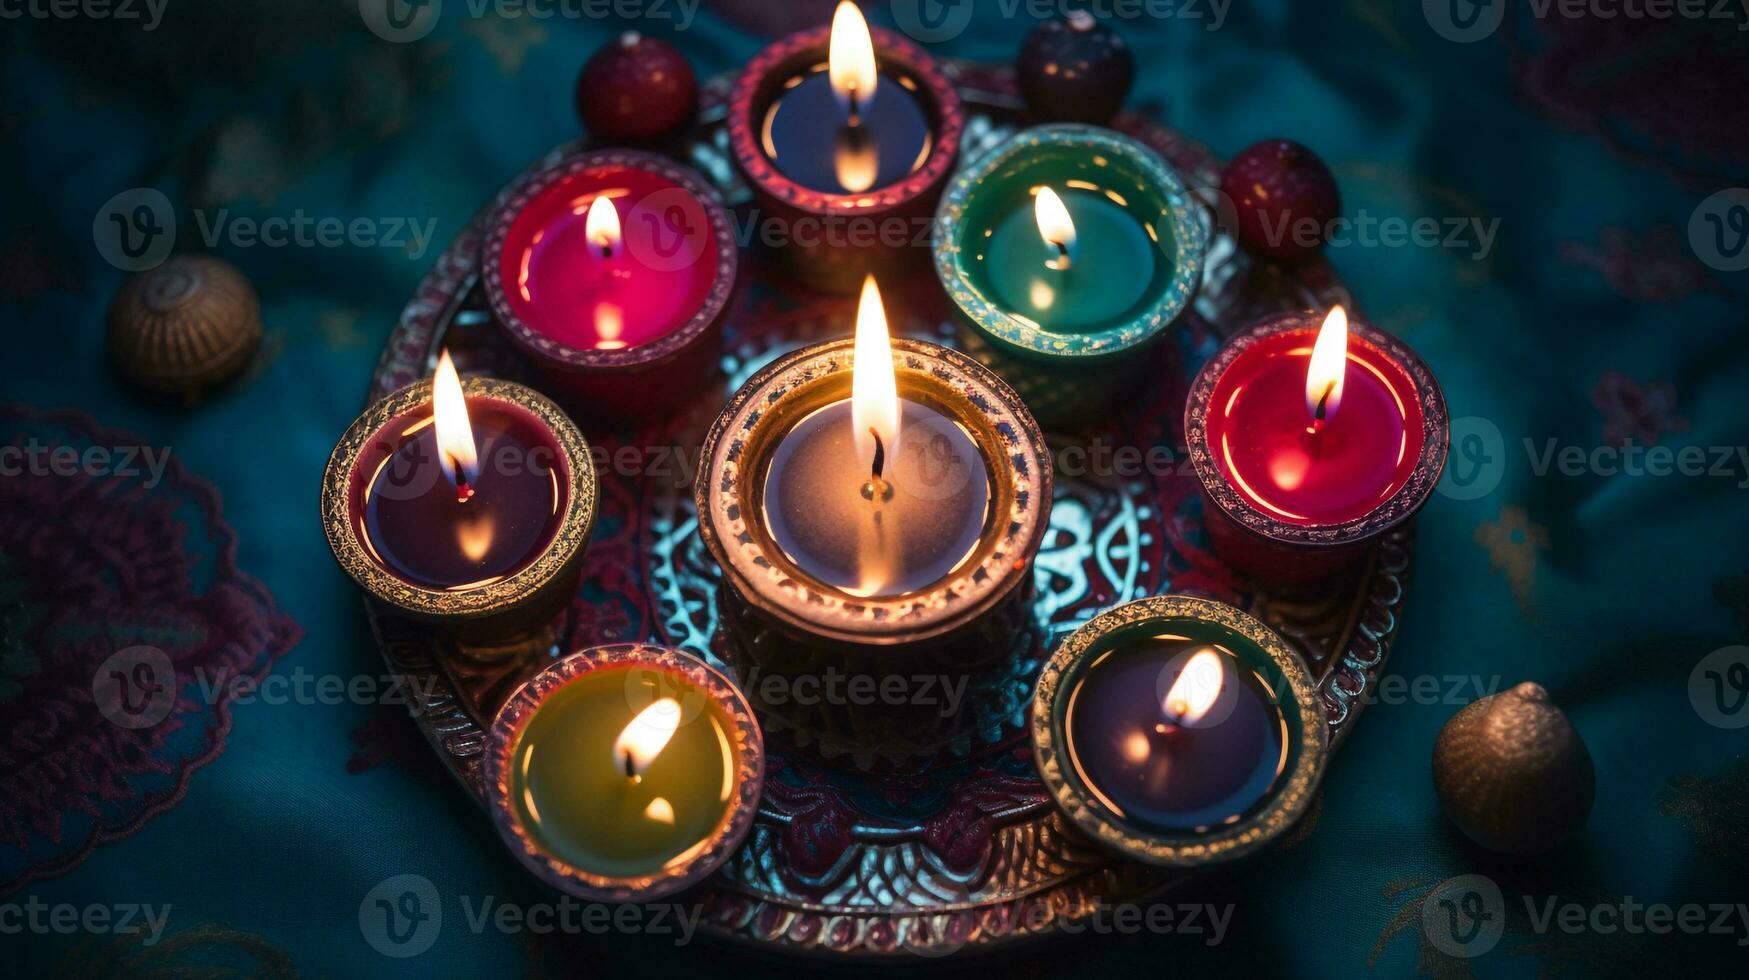 Diwali lights with candles sat on a red pattern, diwali stock images, realistic stock photos